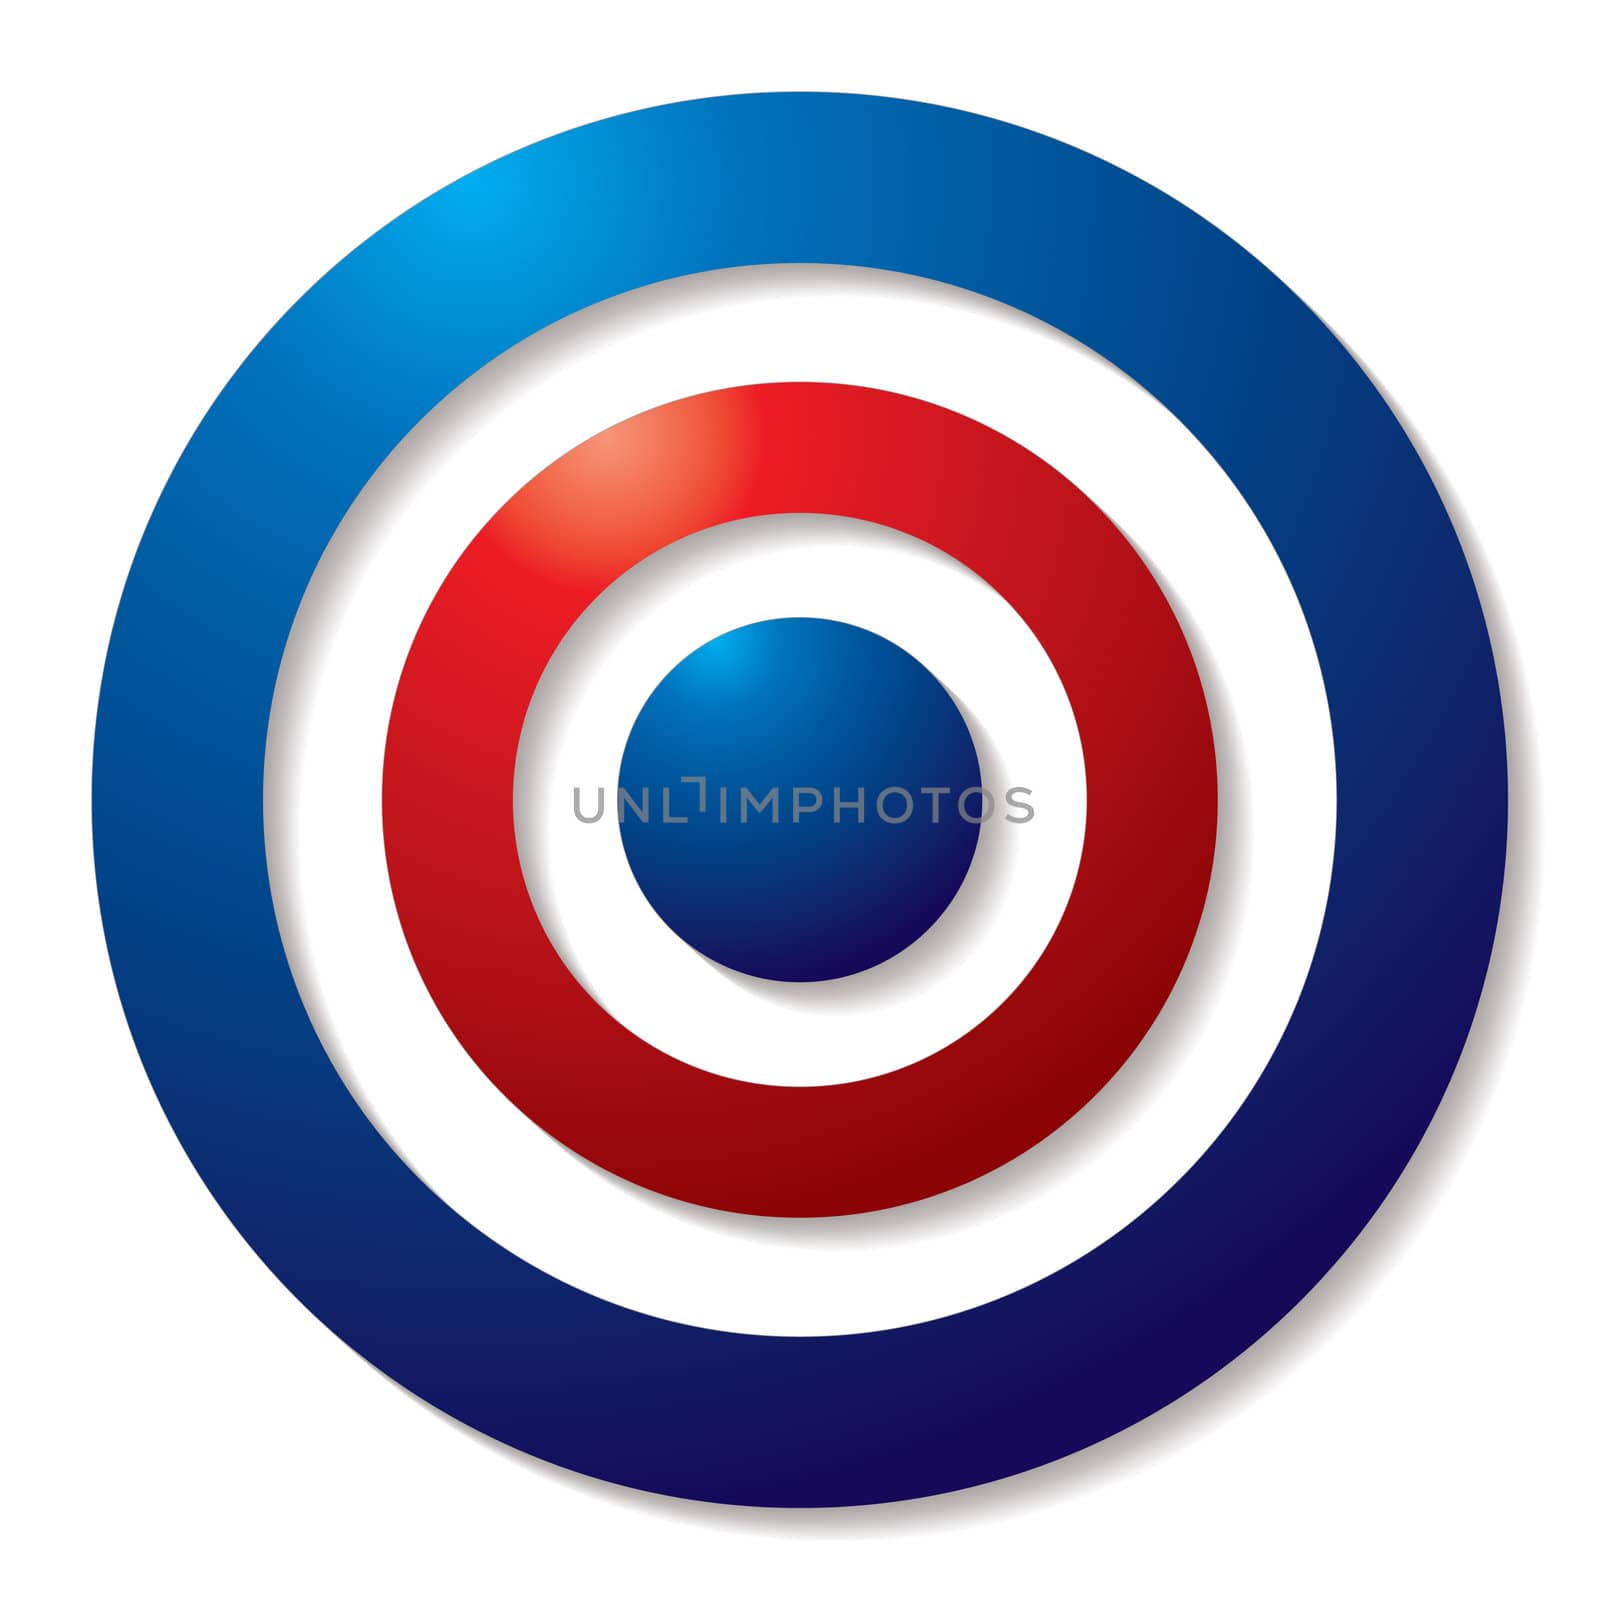 tricolor target in red white and blue with shadow effect